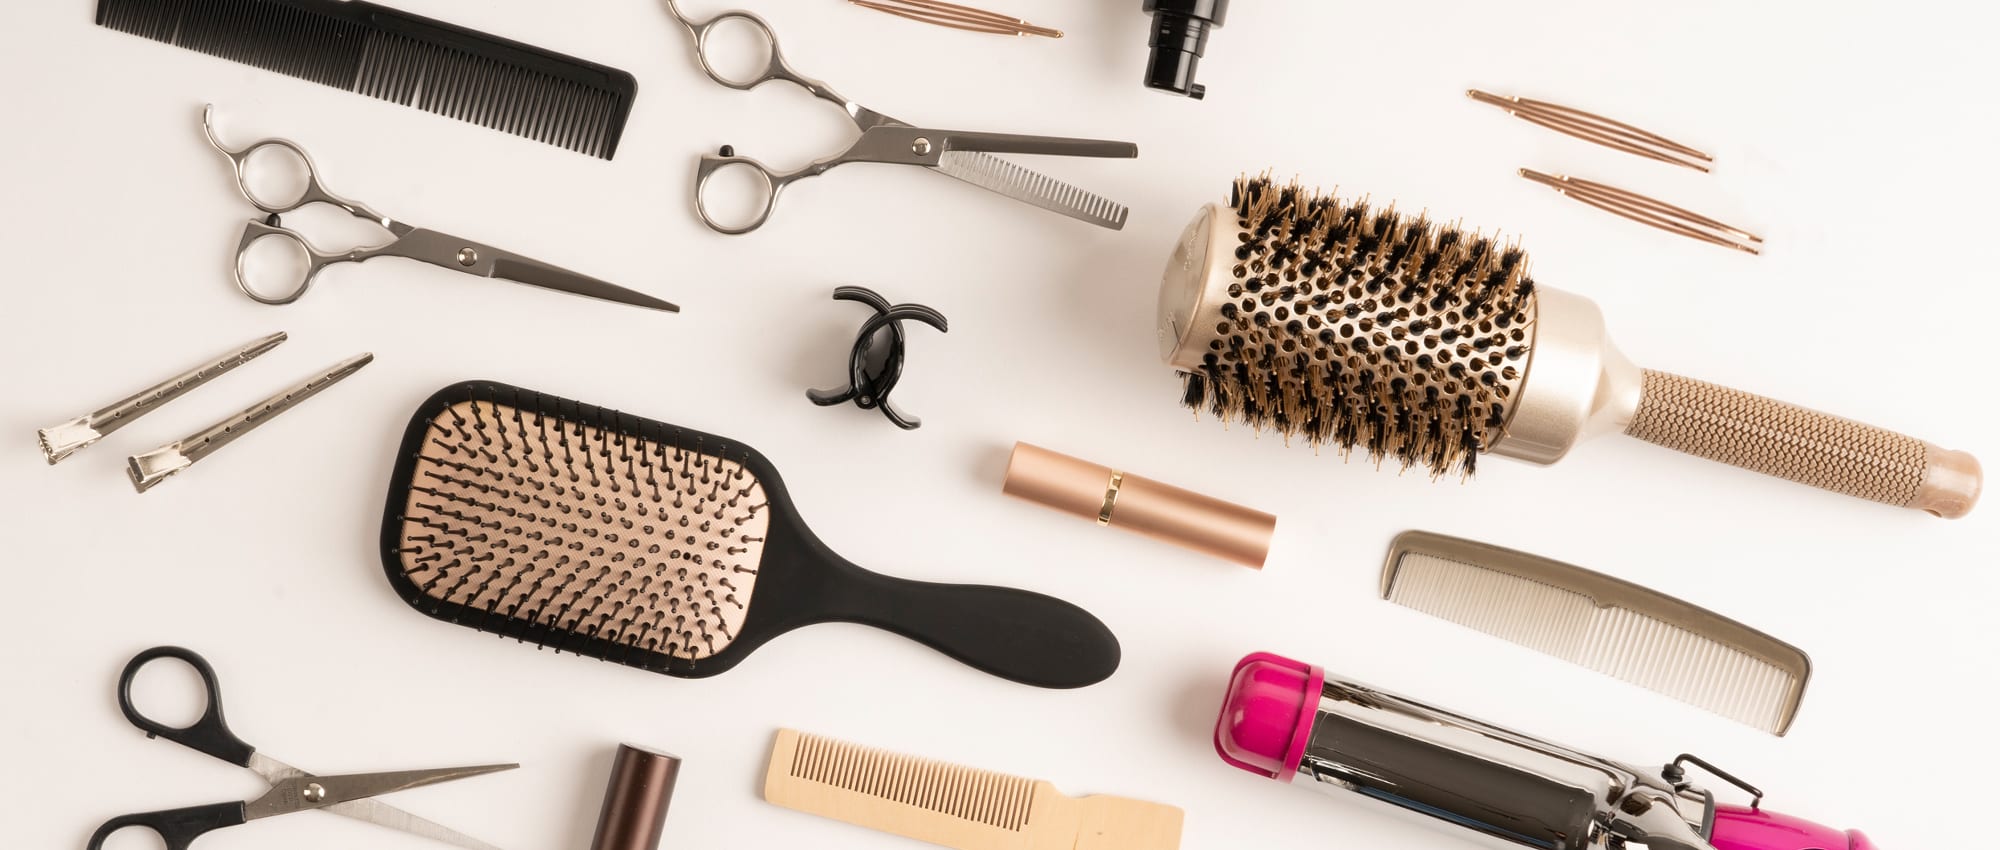 Haircare fulfillment products: brushes, combs, clips, and scissors.